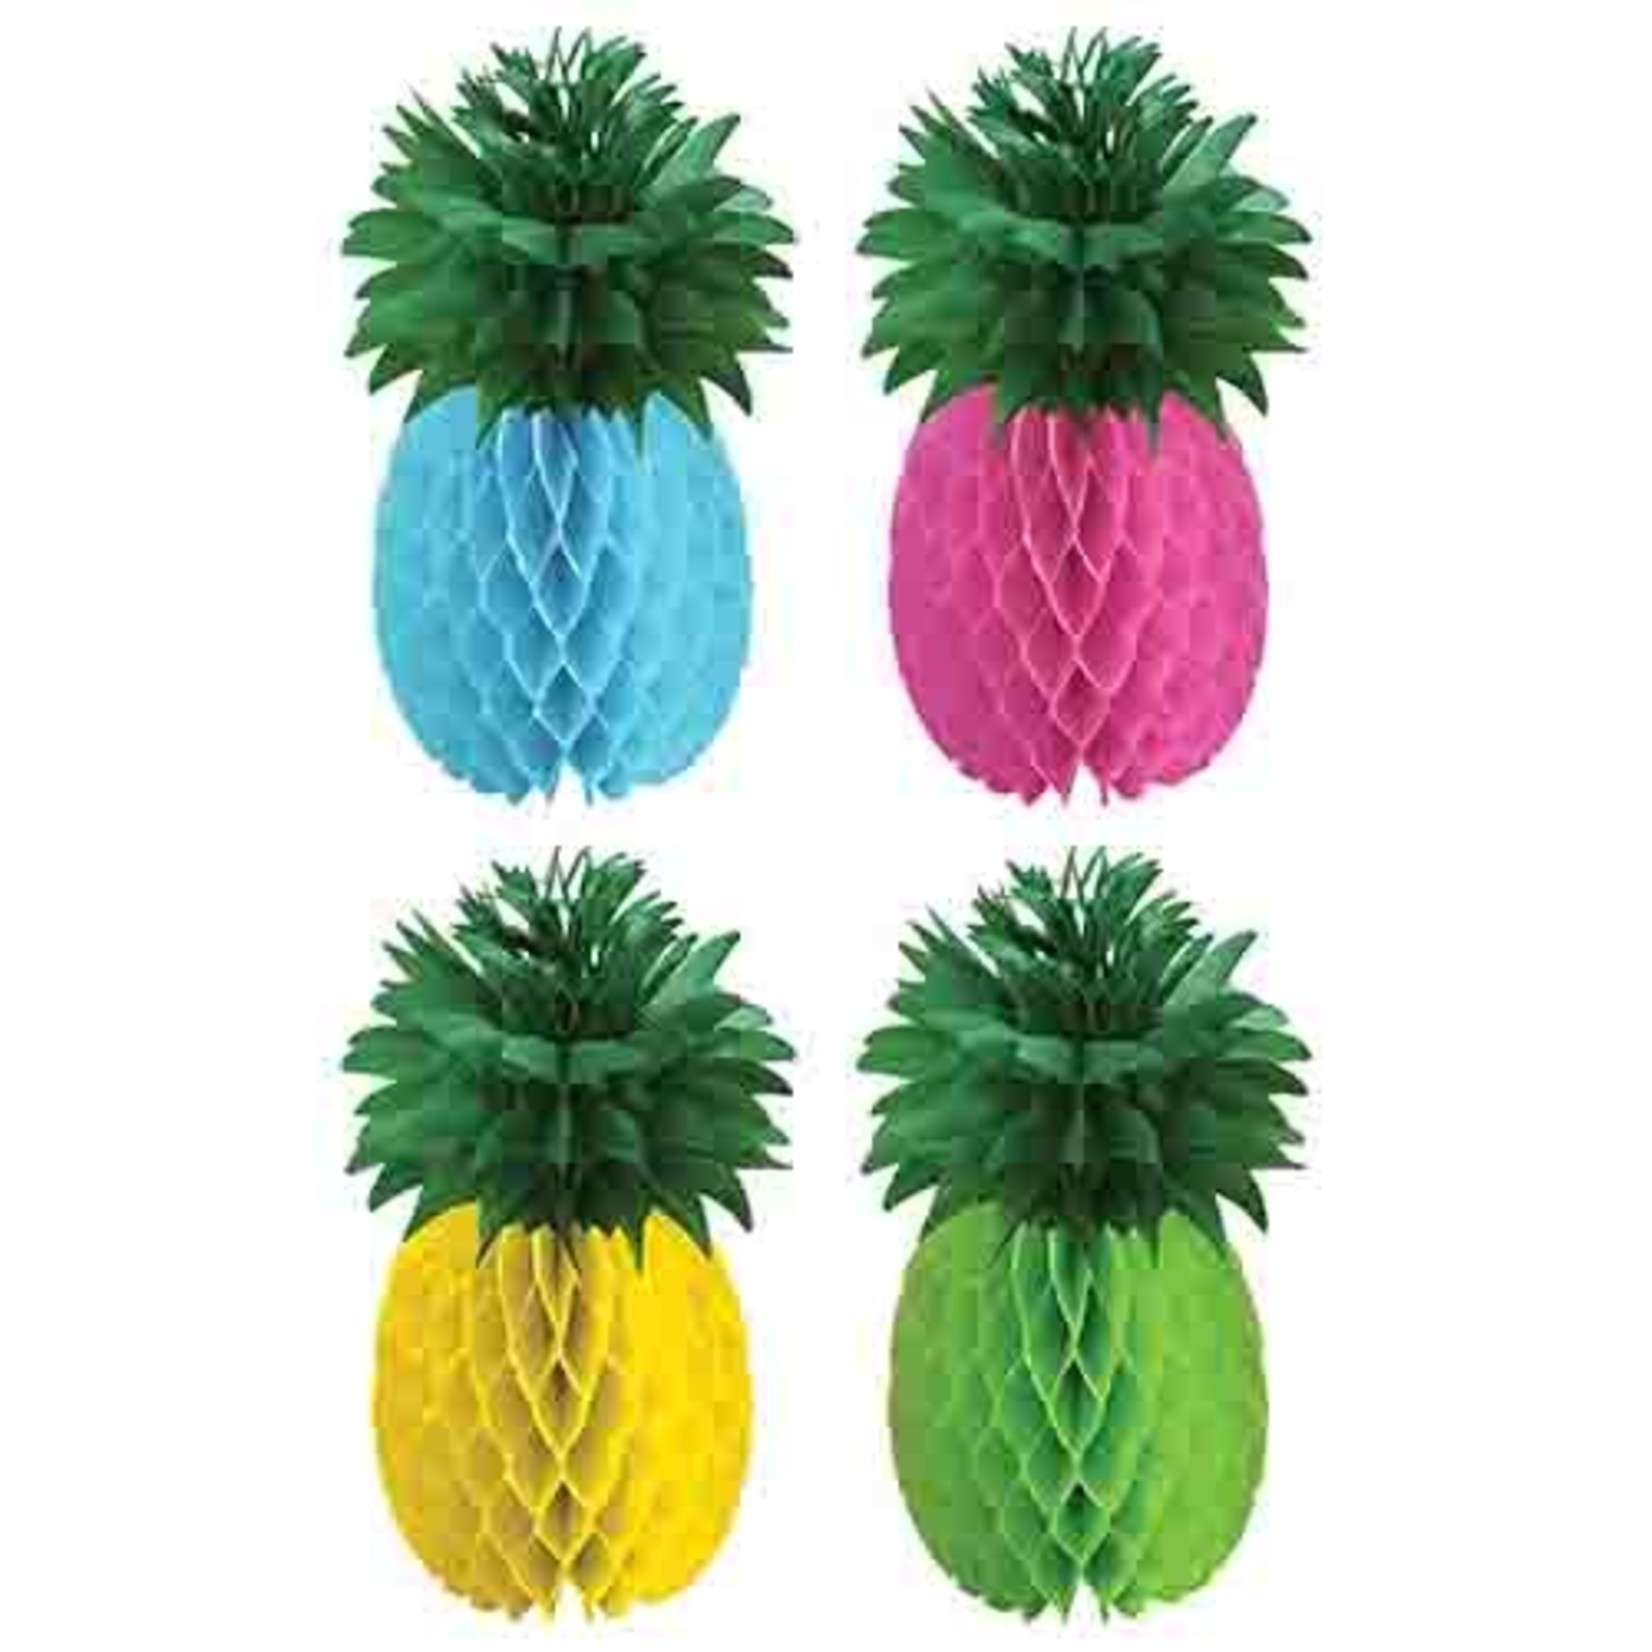 Amscan 11.5" Pineapple Honeycomb Centerpieces - 4ct.